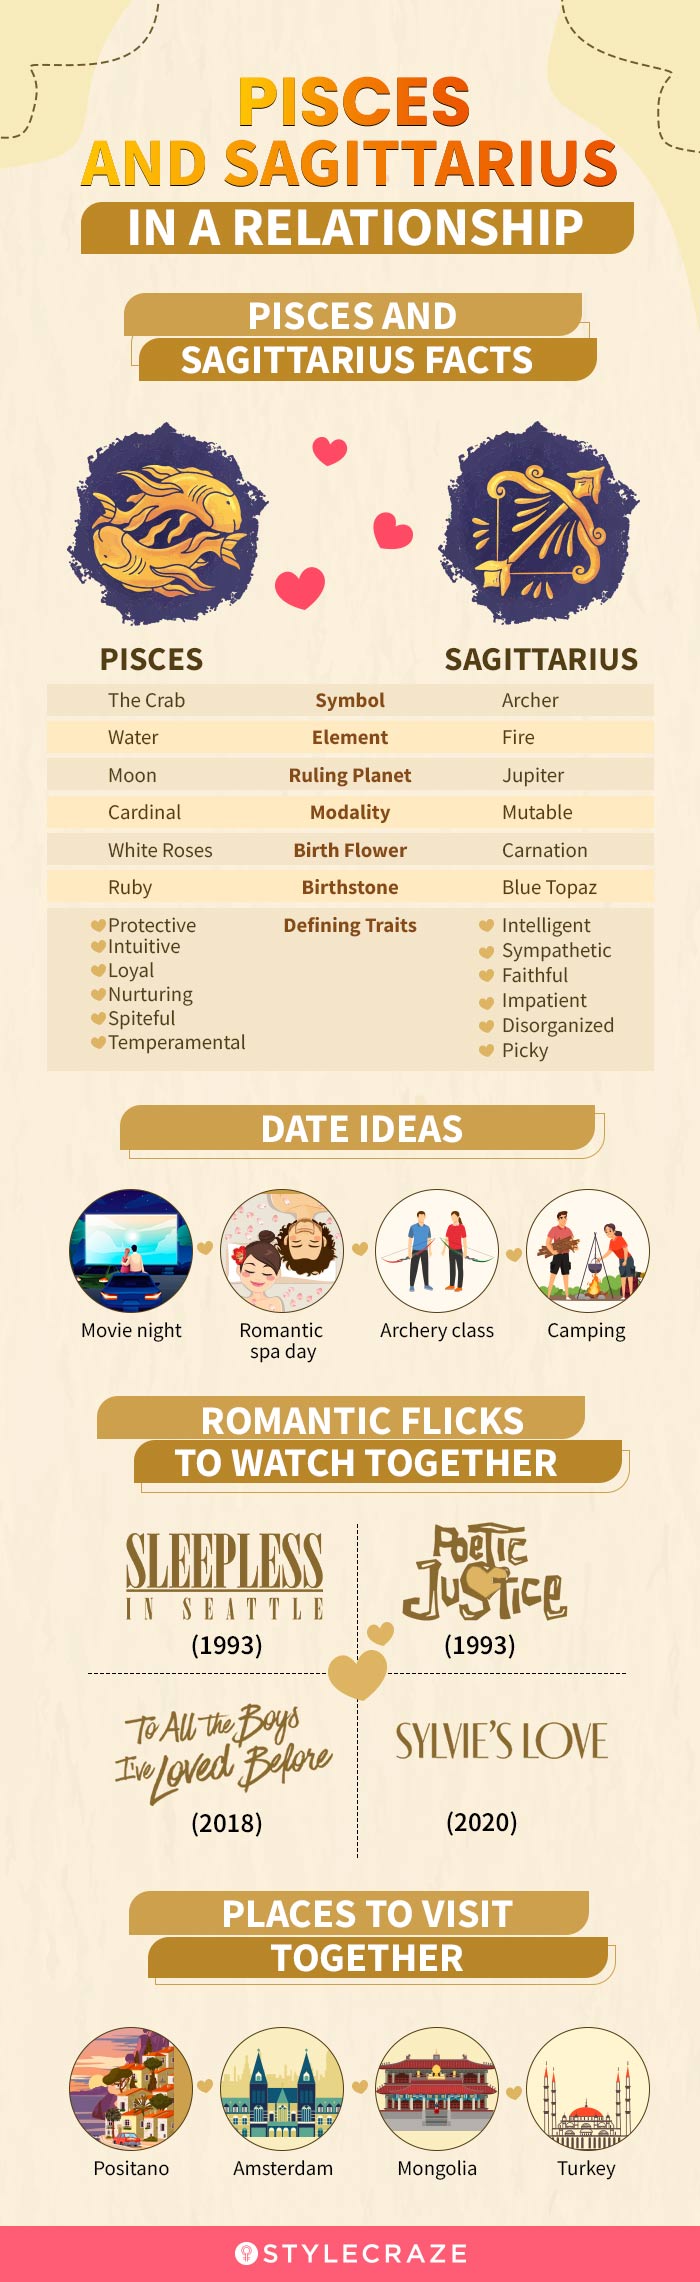 pisces and sagittarius in a relationship [infographic]